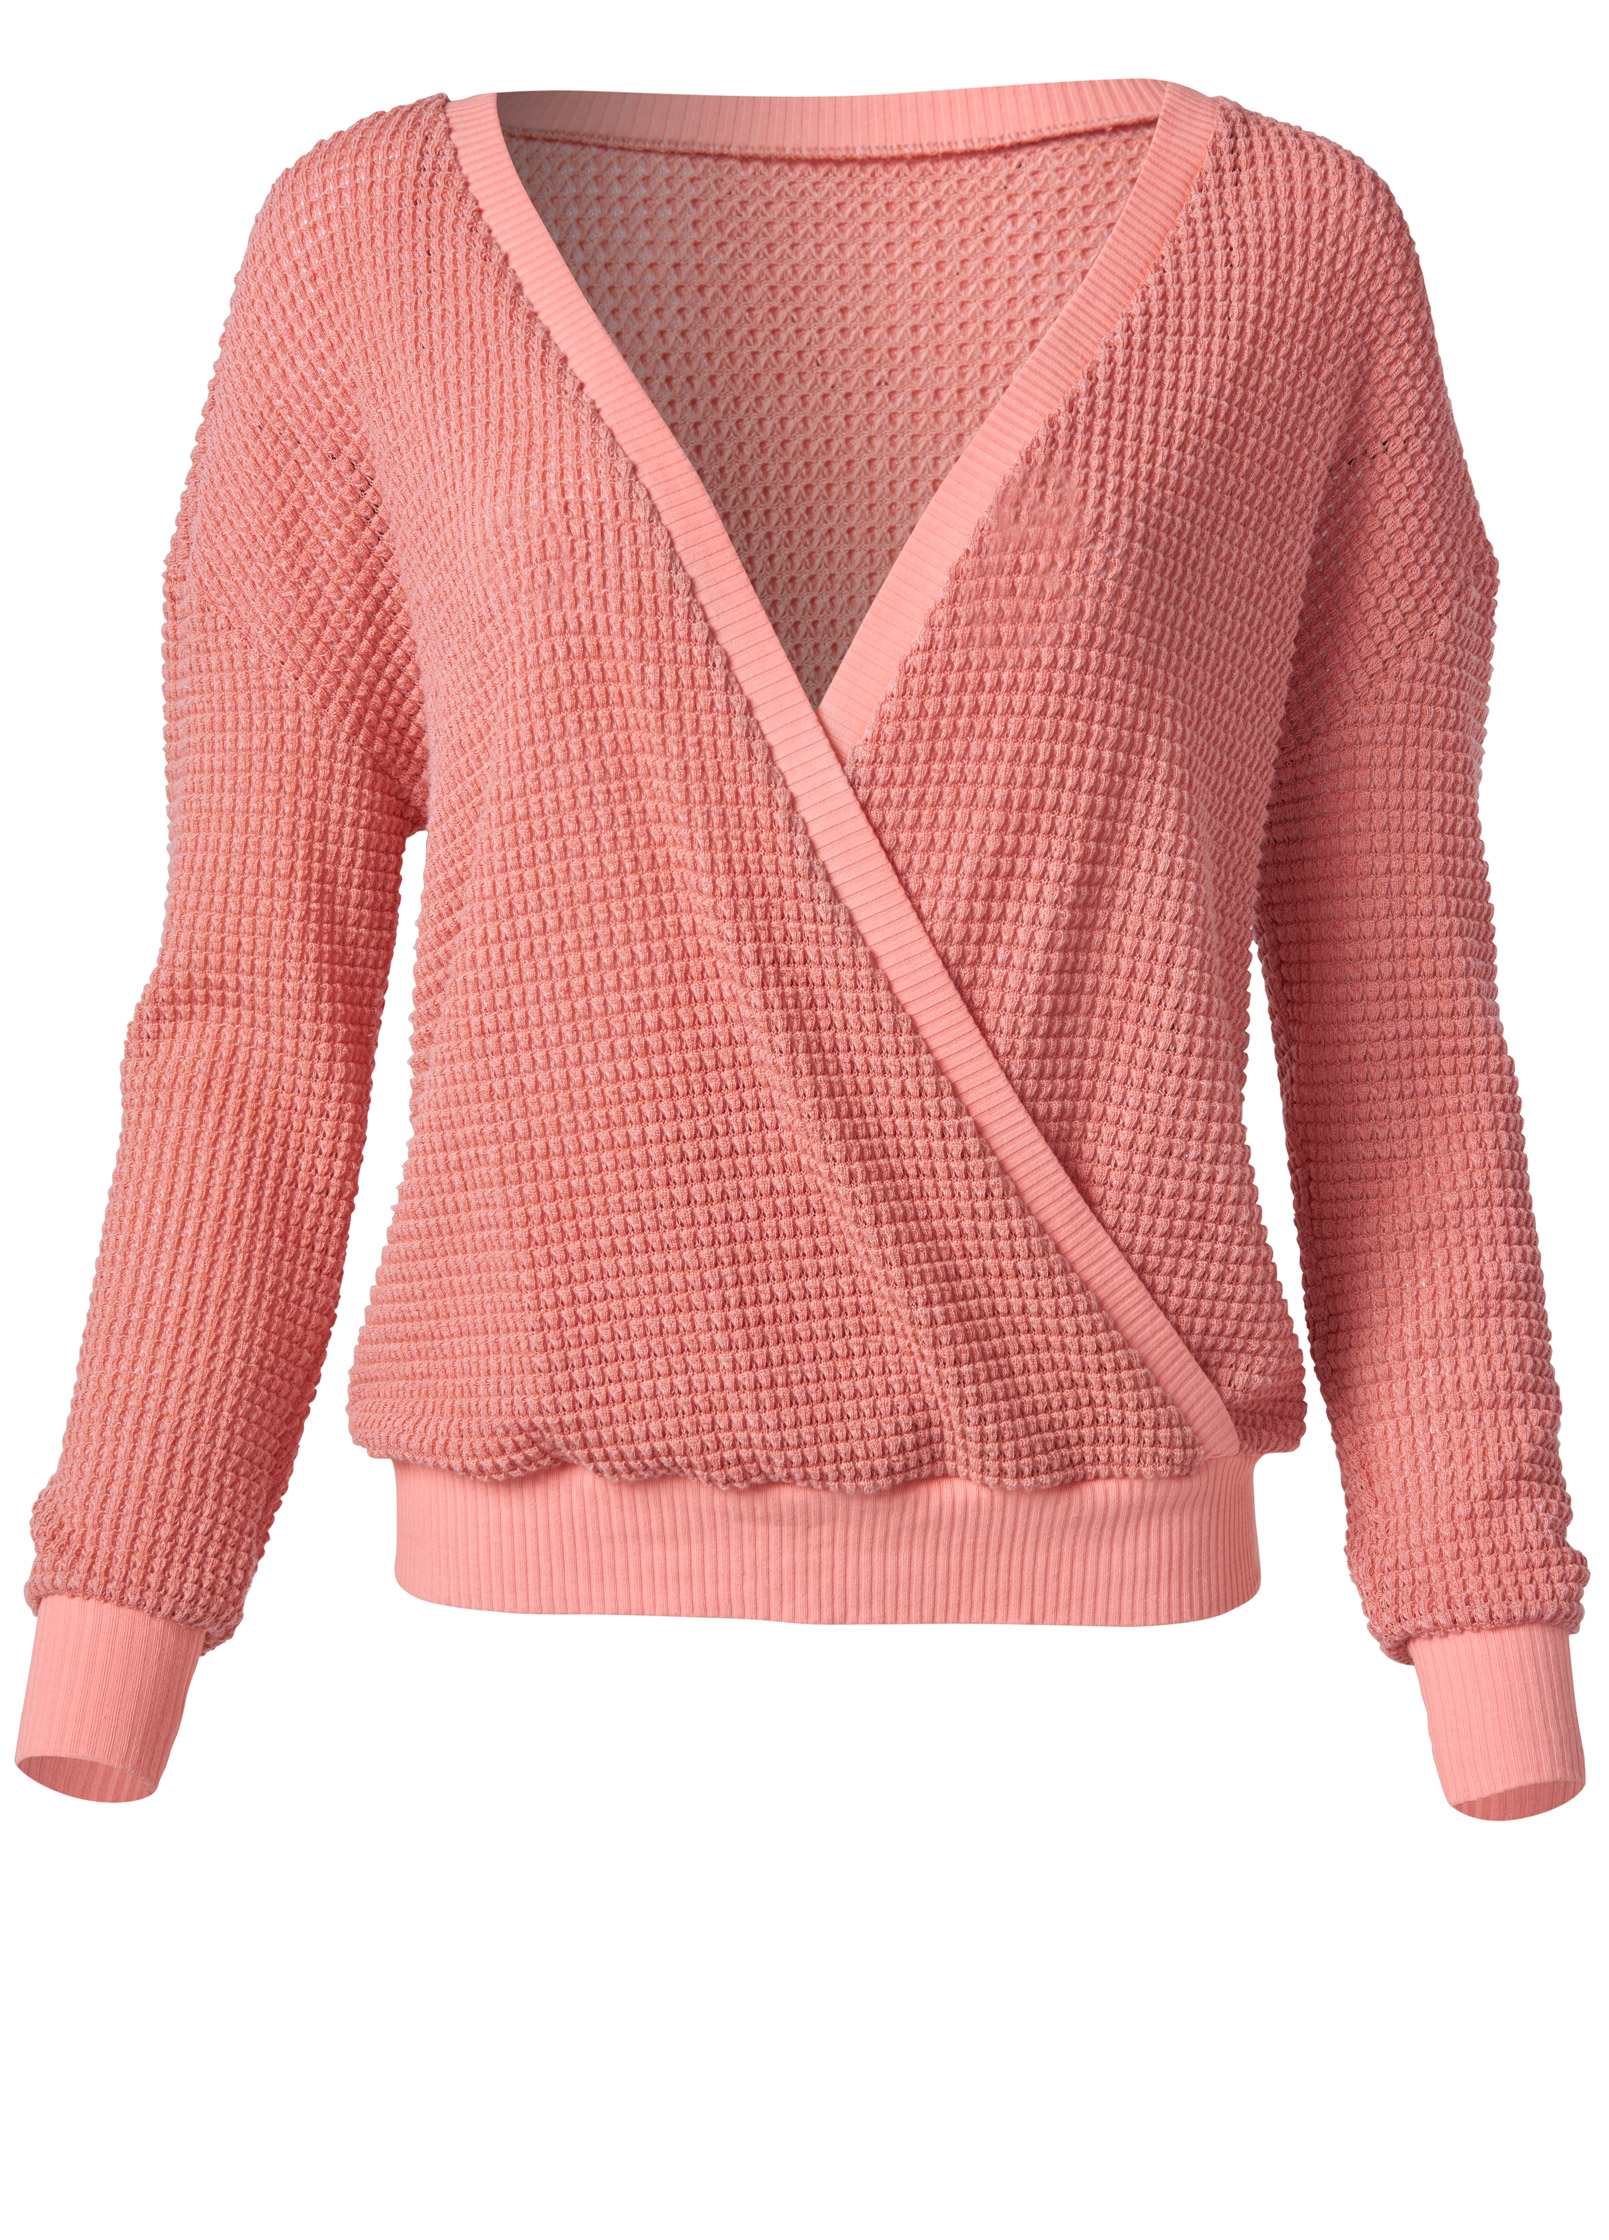 WAFFLE KNIT SURPLICE LOUNGE TOP in Coral | VENUS